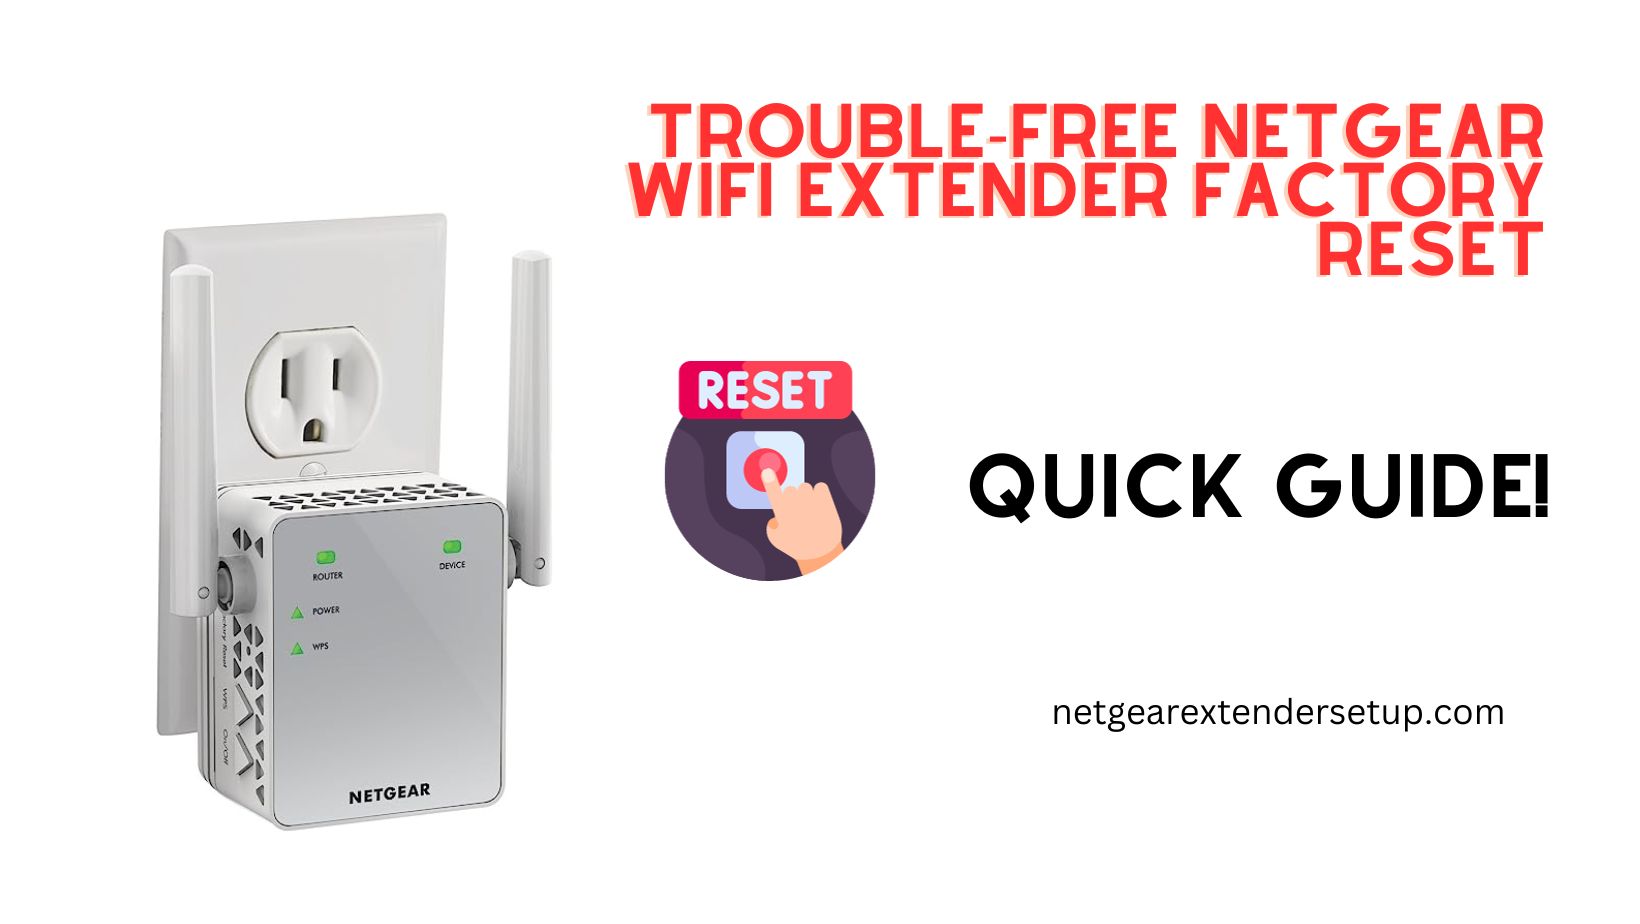 You are currently viewing Trouble-Free Netgear WiFi Extender Factory Reset | Quick Guide!